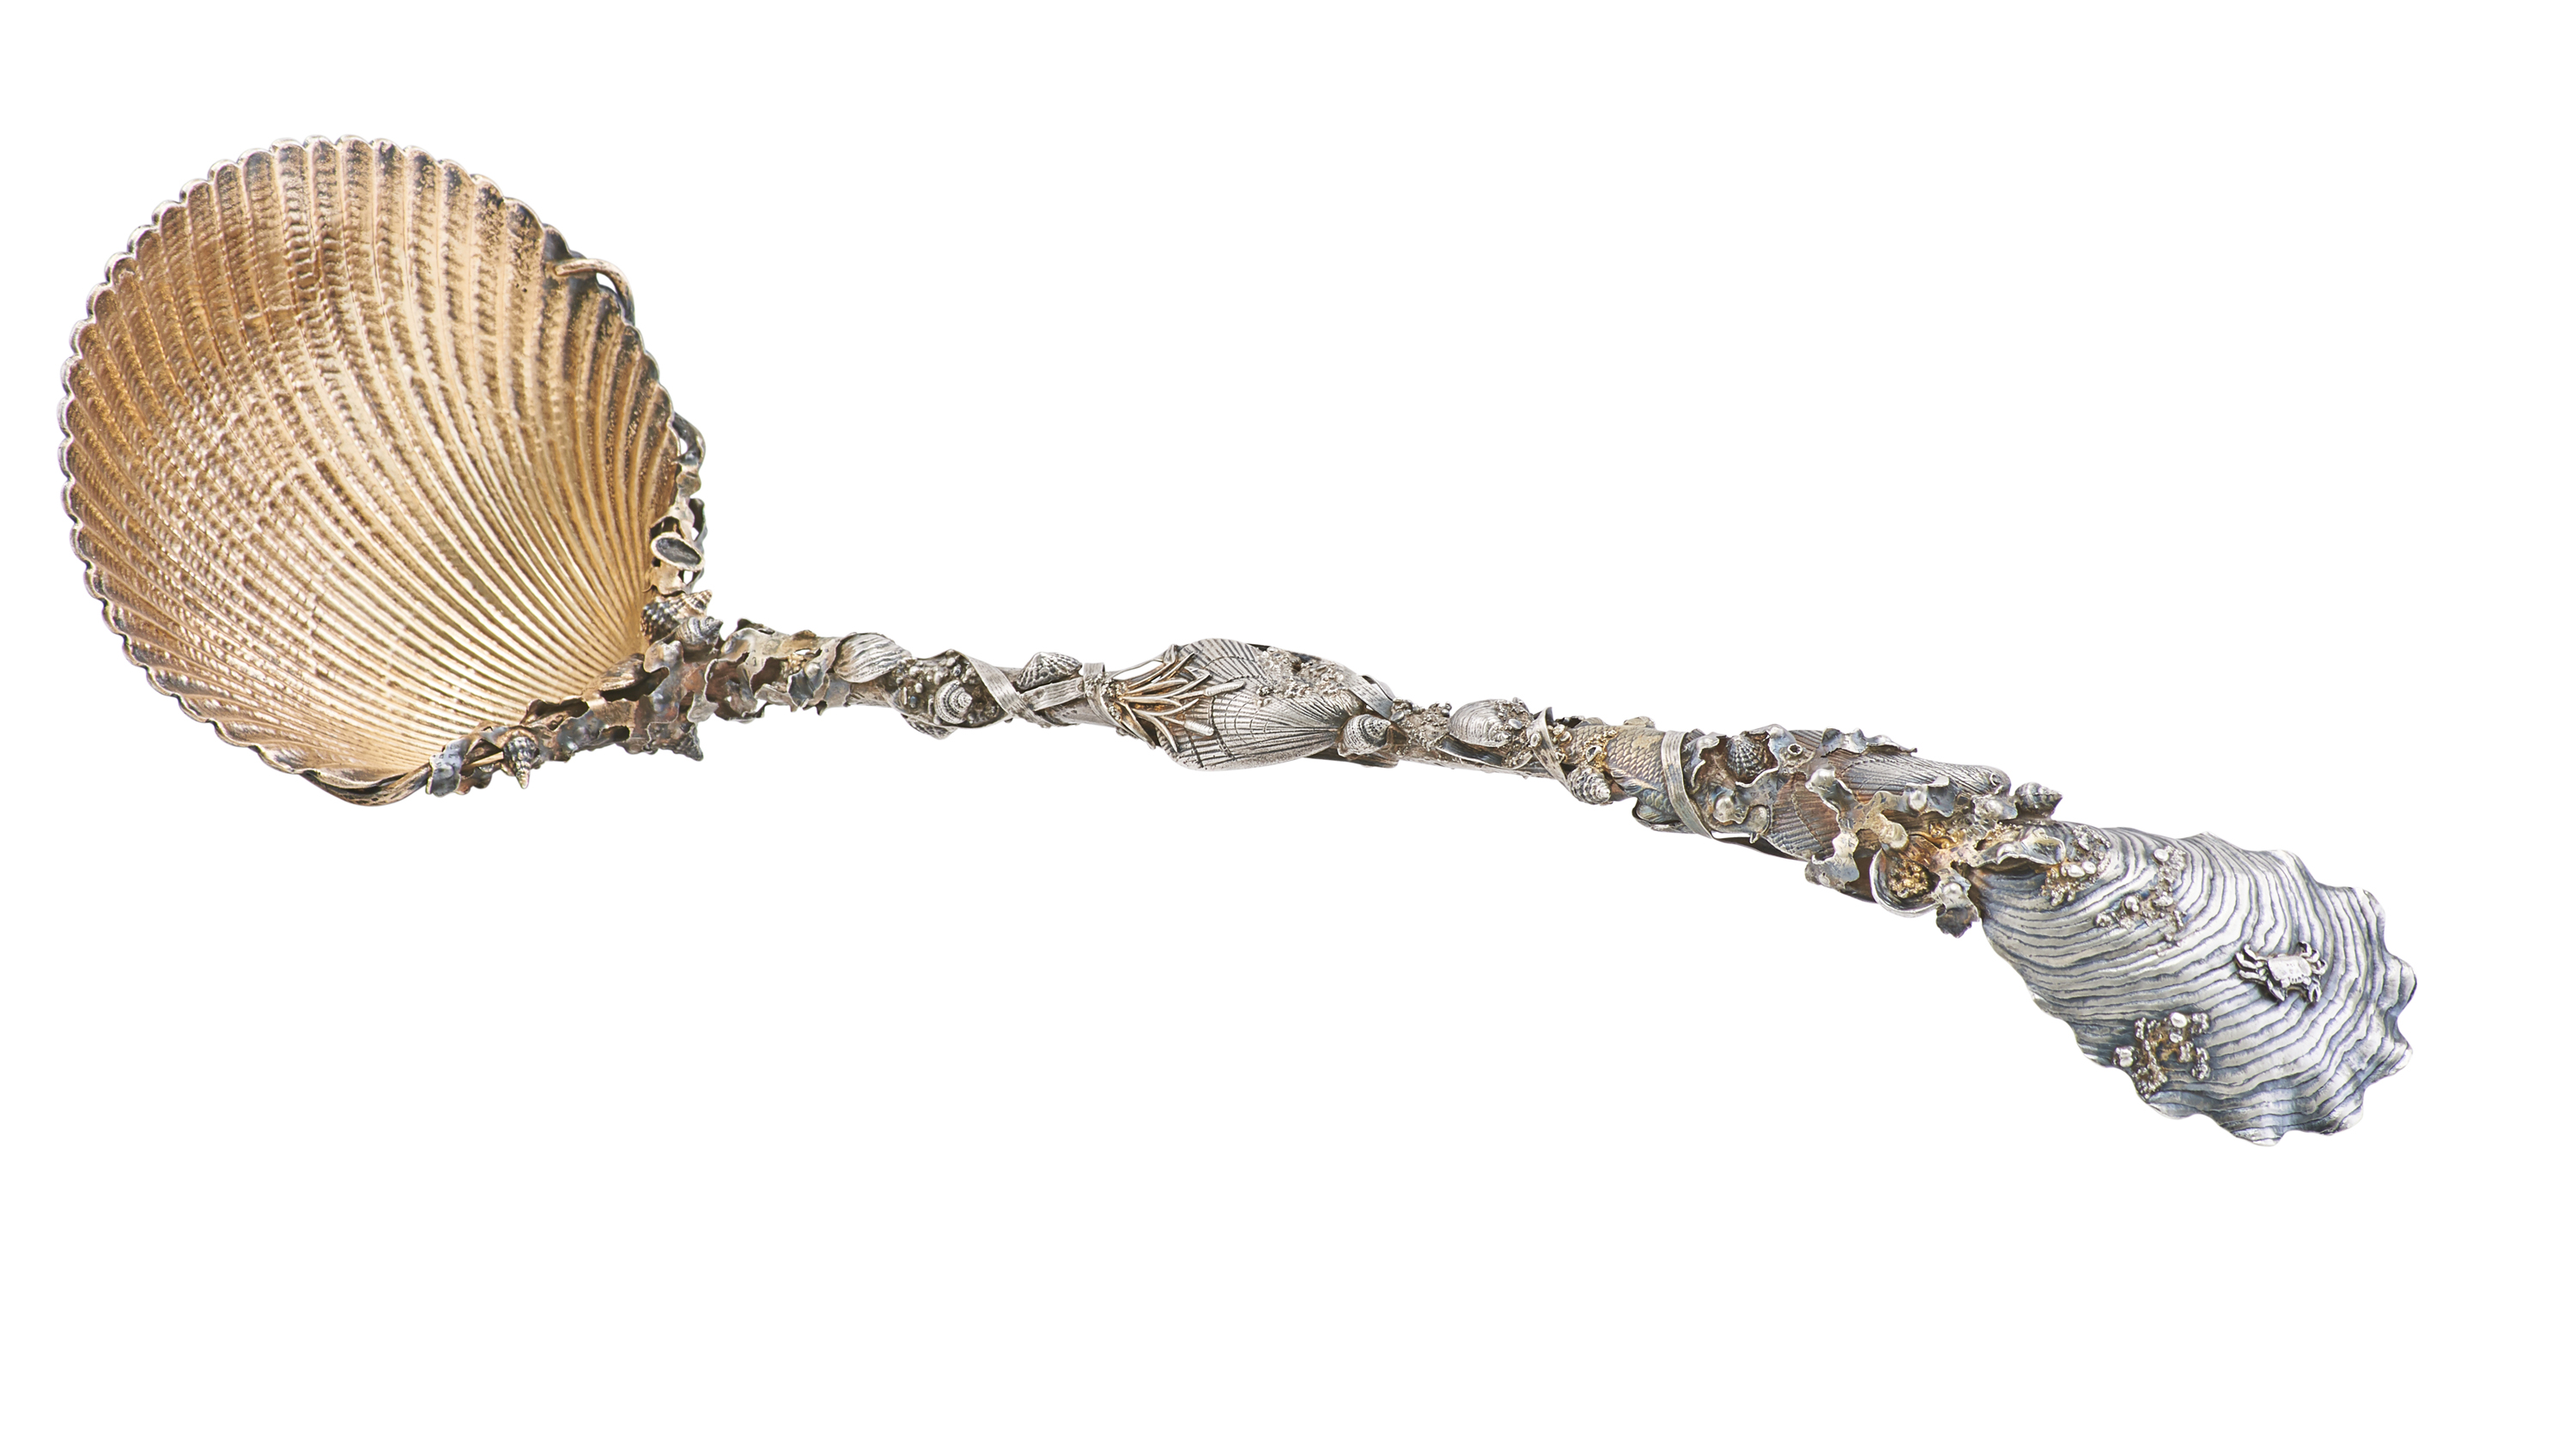 This circa 1880s parcel gilt sterling silver punch ladle in the Narragansett pattern by Gorham has a shell-shaped spoon that truly resembles a cockle shell. The interior of the spoon is gold. The stem of the ladle is festooned with with seaweed, fish, and grains of sand. The top of the handle resembles an oyster shell.